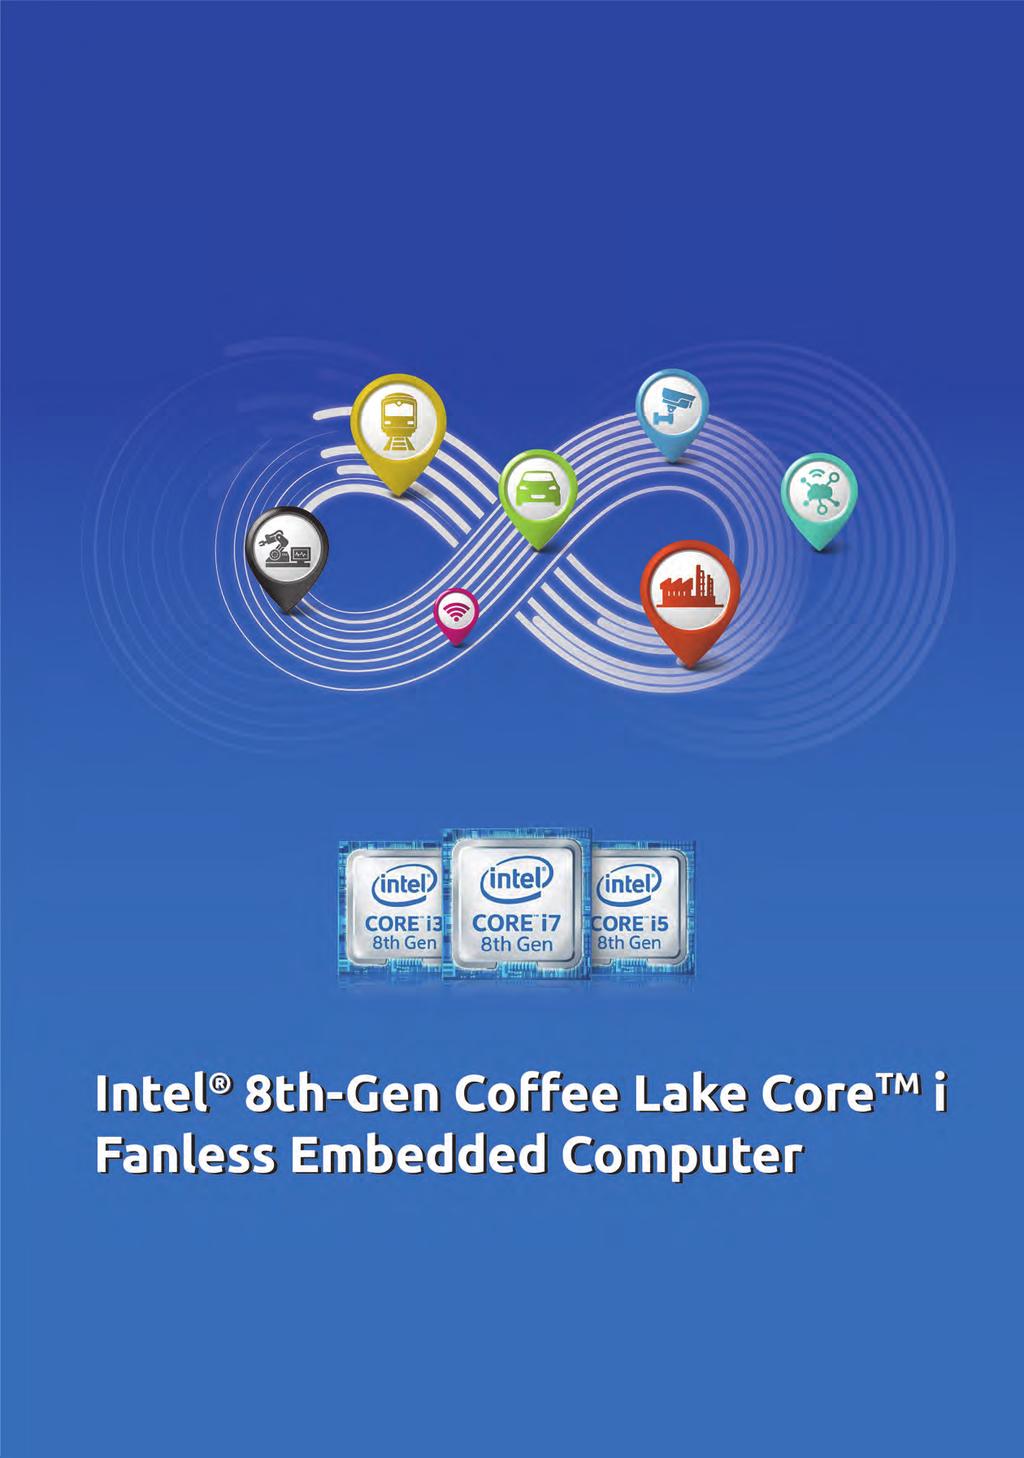 Rugged Embedded Nuvo-7000E/ 7000DE/ 7000P Series Intel 8th-Gen Coffee Lake Core i7/ i5/ i3 Fanless Controller with 6x GbE Ports, Patented Cassette and MezIO Interface Intel 8th-Gen Core i hexa-core